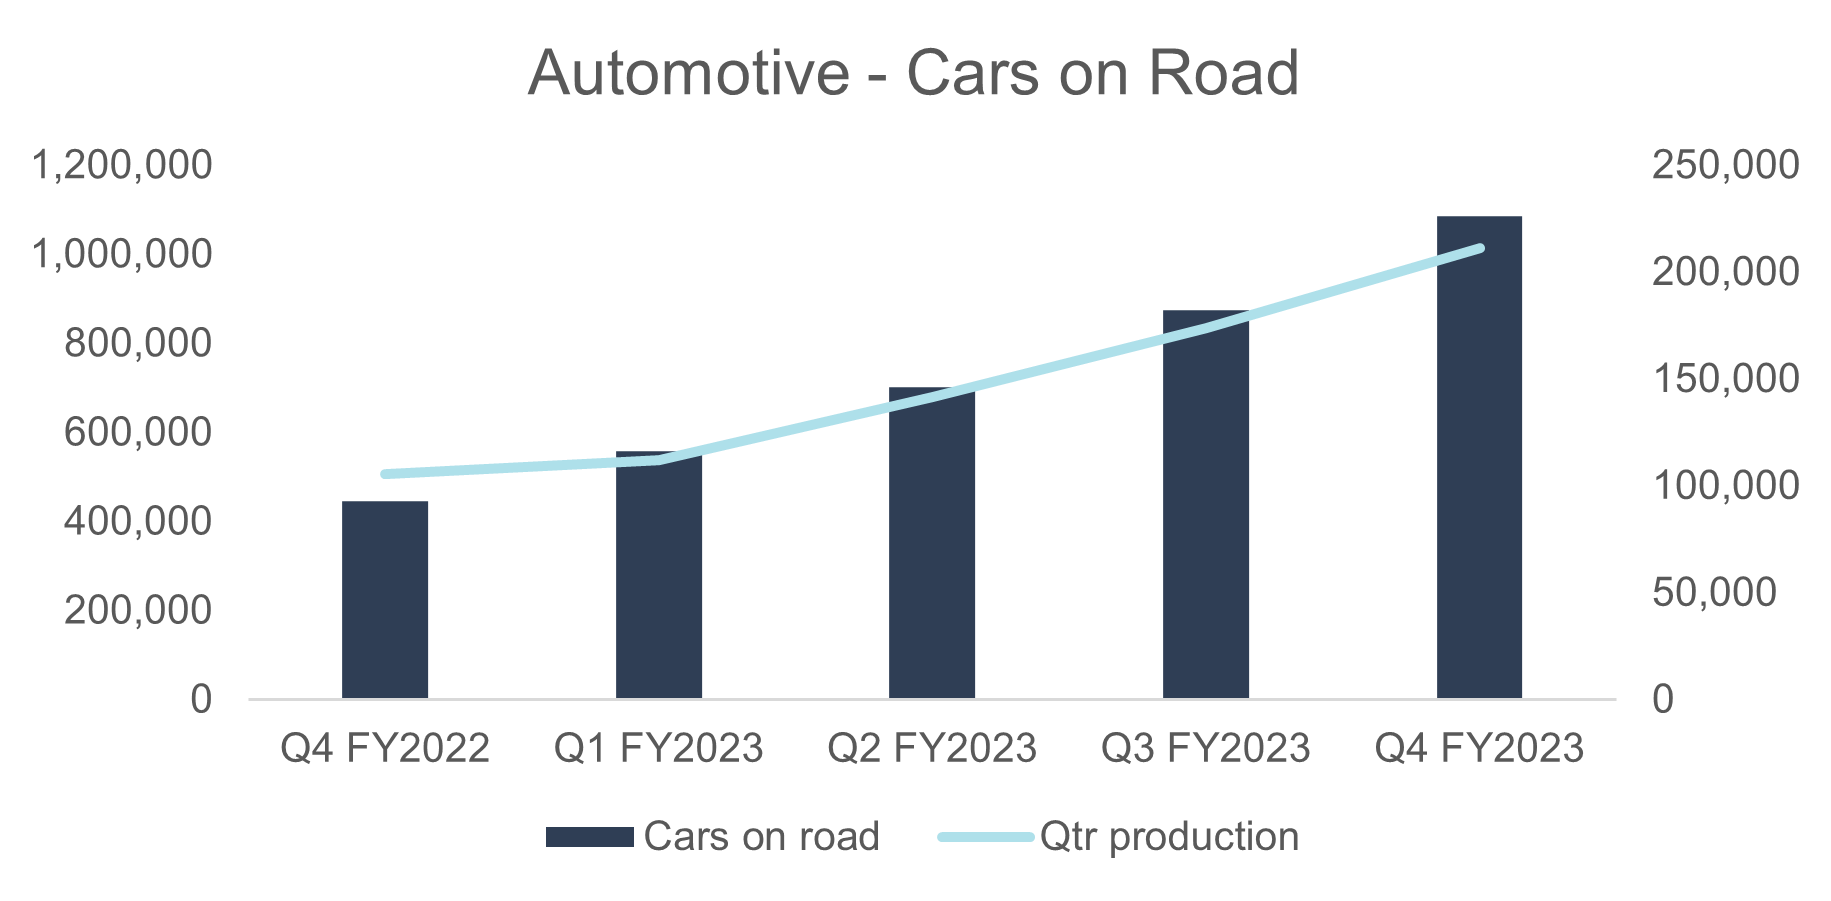 Graph showing increase in cars on road with Seeing Machines' driver monitoring system technology installed over FY2023